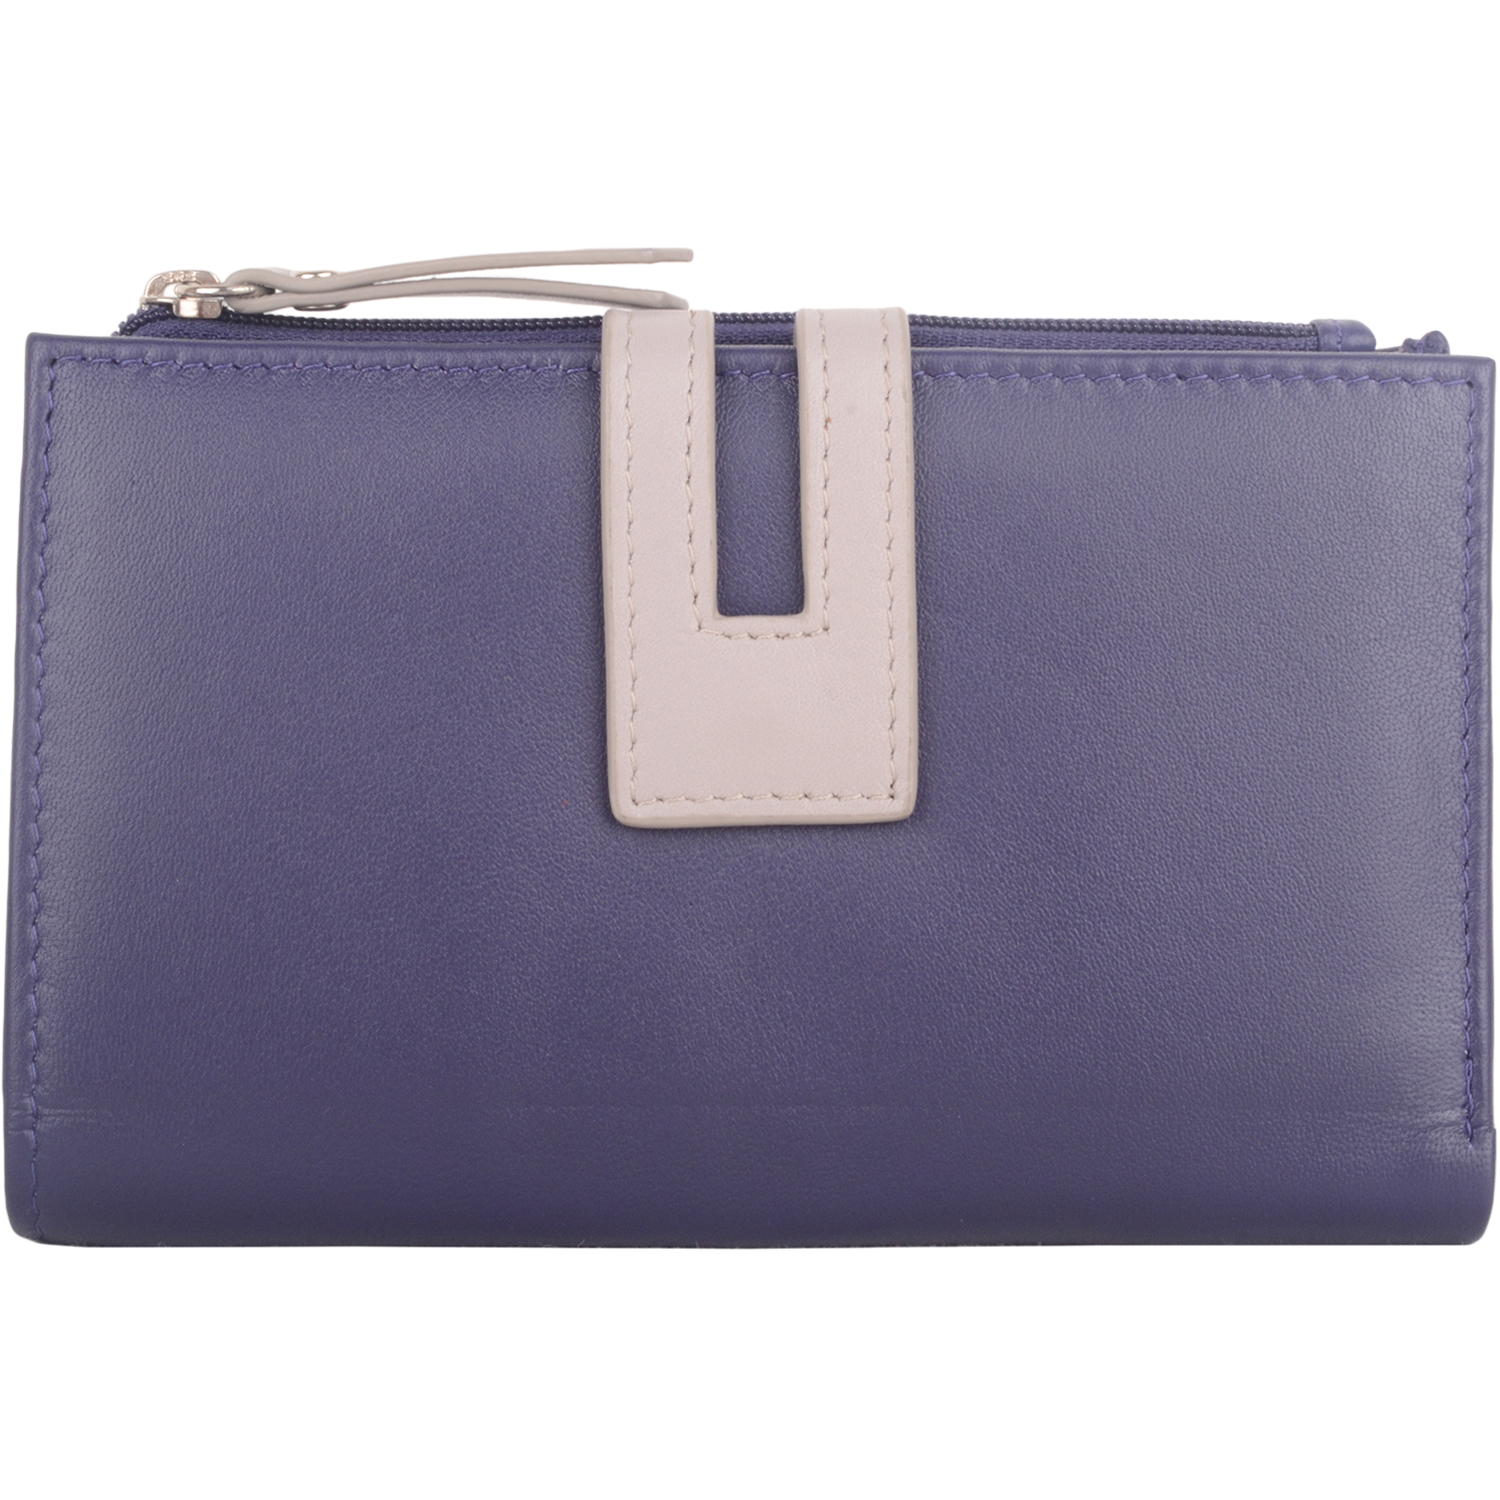 Ladies Leather Purse/Wallet by London Leather Goods 17 Credit Card Slots  (Blush) : Amazon.co.uk: Fashion